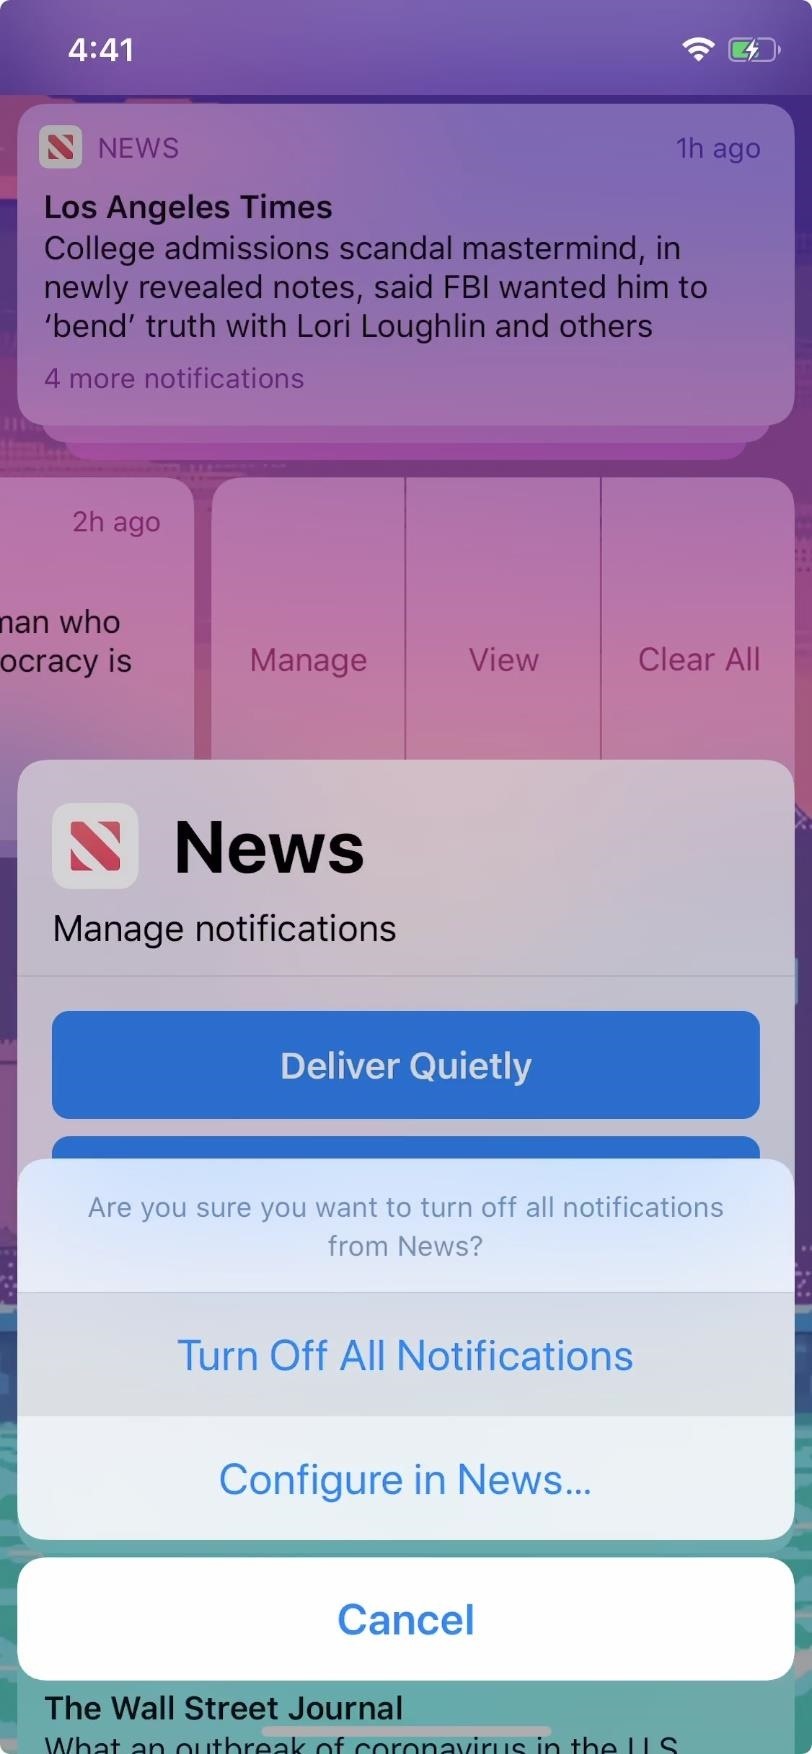 Tame Out of Control Notifications on Your iPhone in Seconds with This Quick Move